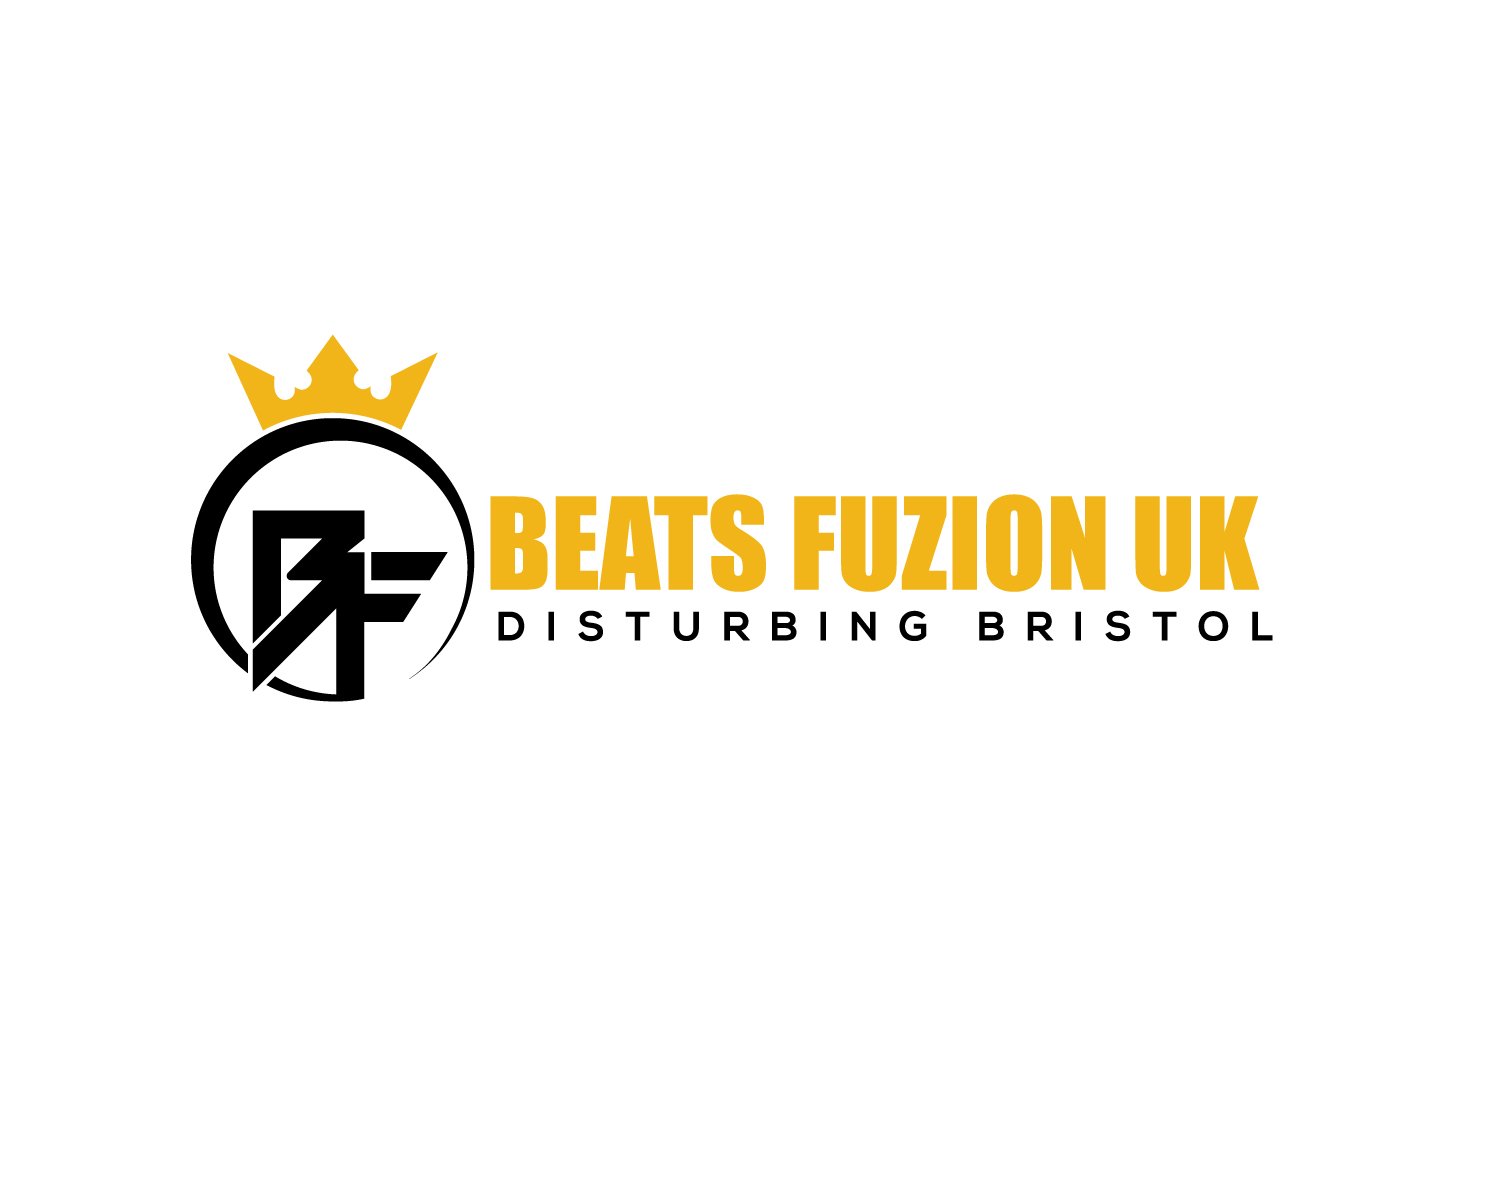 Beats Fuzion UK celebrates music, dance and life through events - music, radio, fashion, food and comedy. https://t.co/5Ch4Ry5MNO